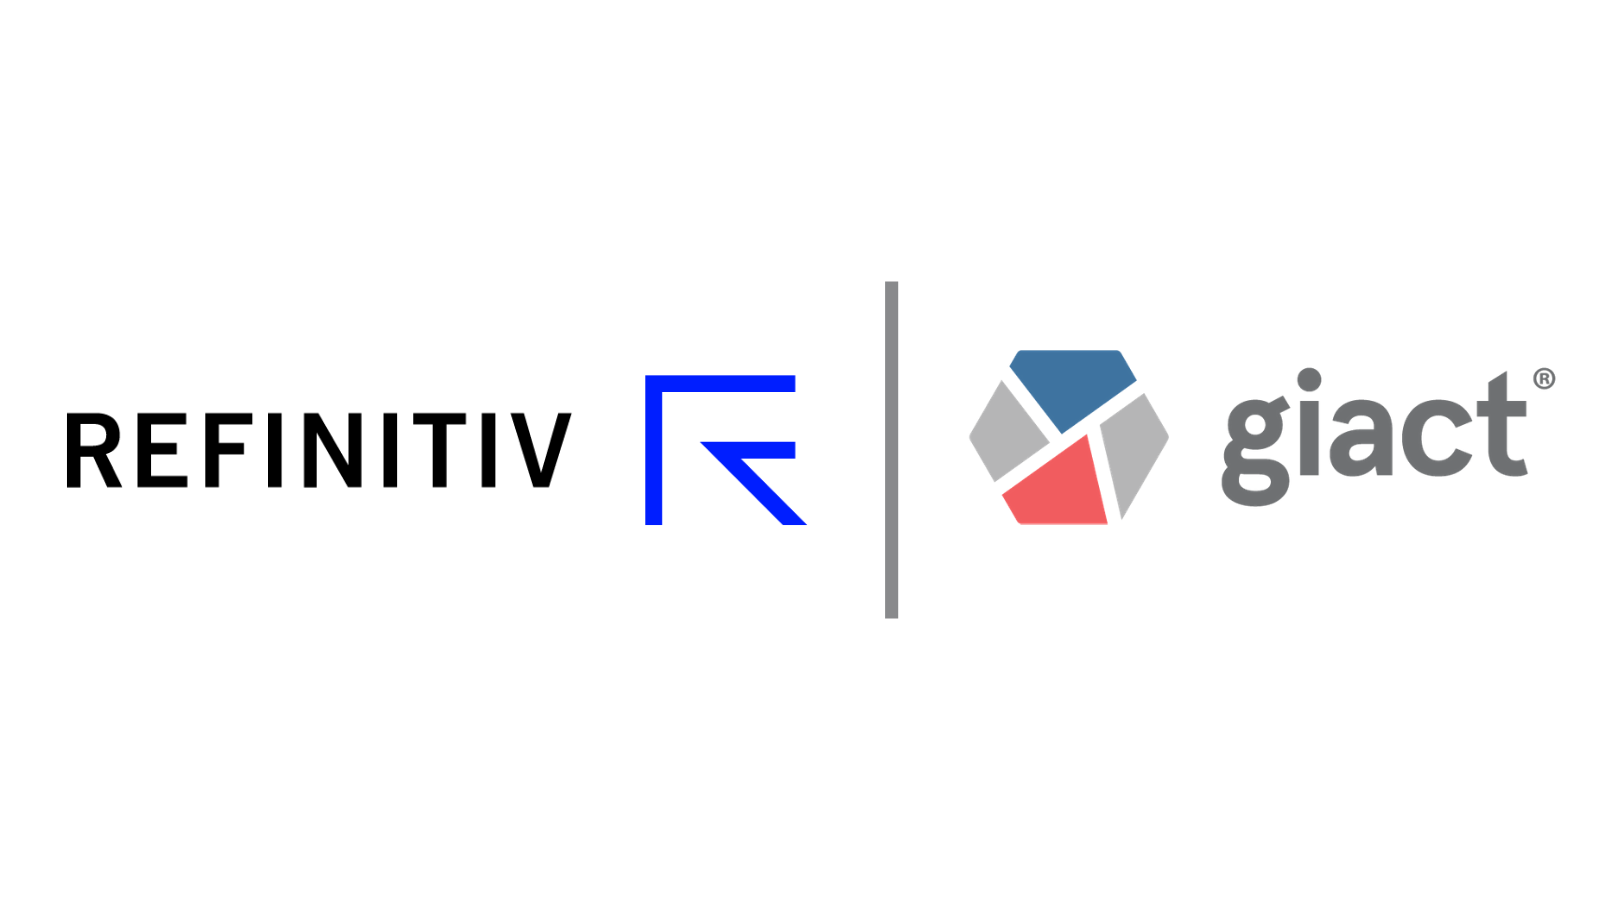 Refinitiv successfully completes acquisition of GIACT